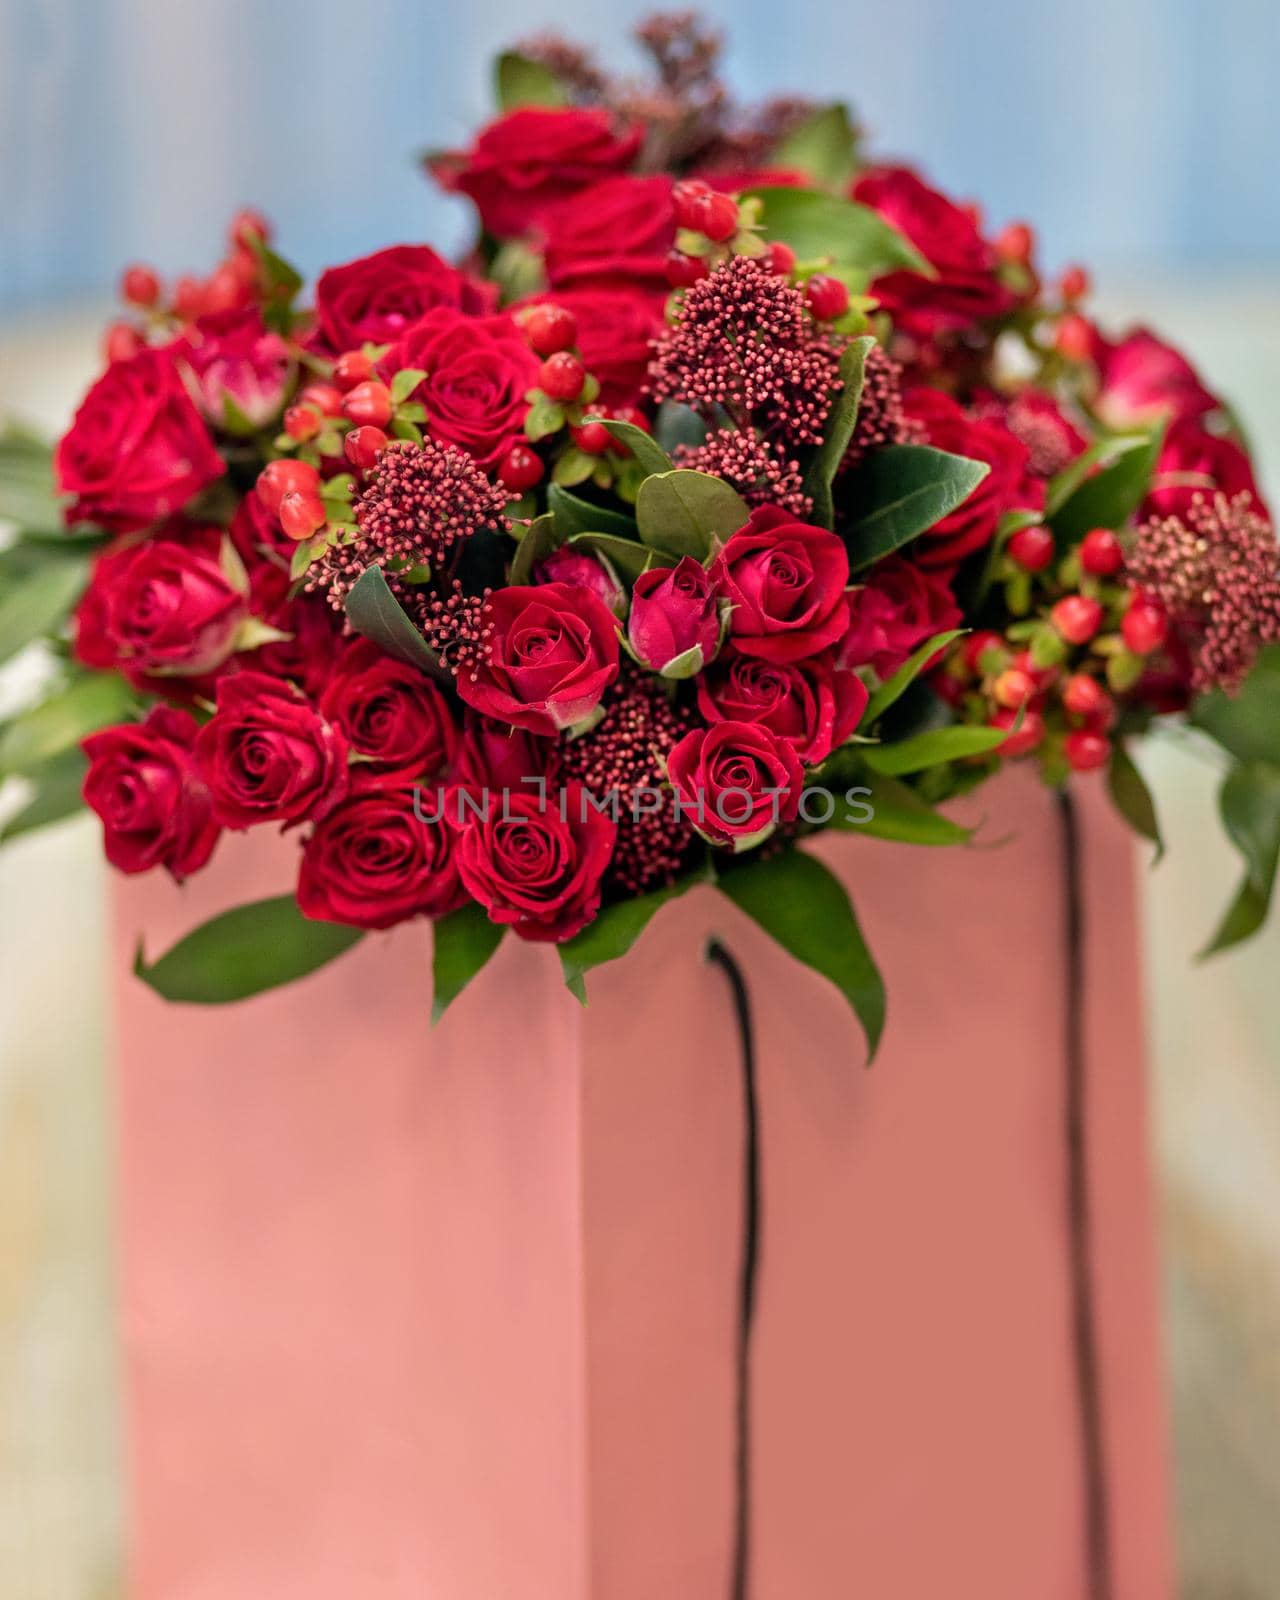 Golden rose bouquet in the box close up by ferhad